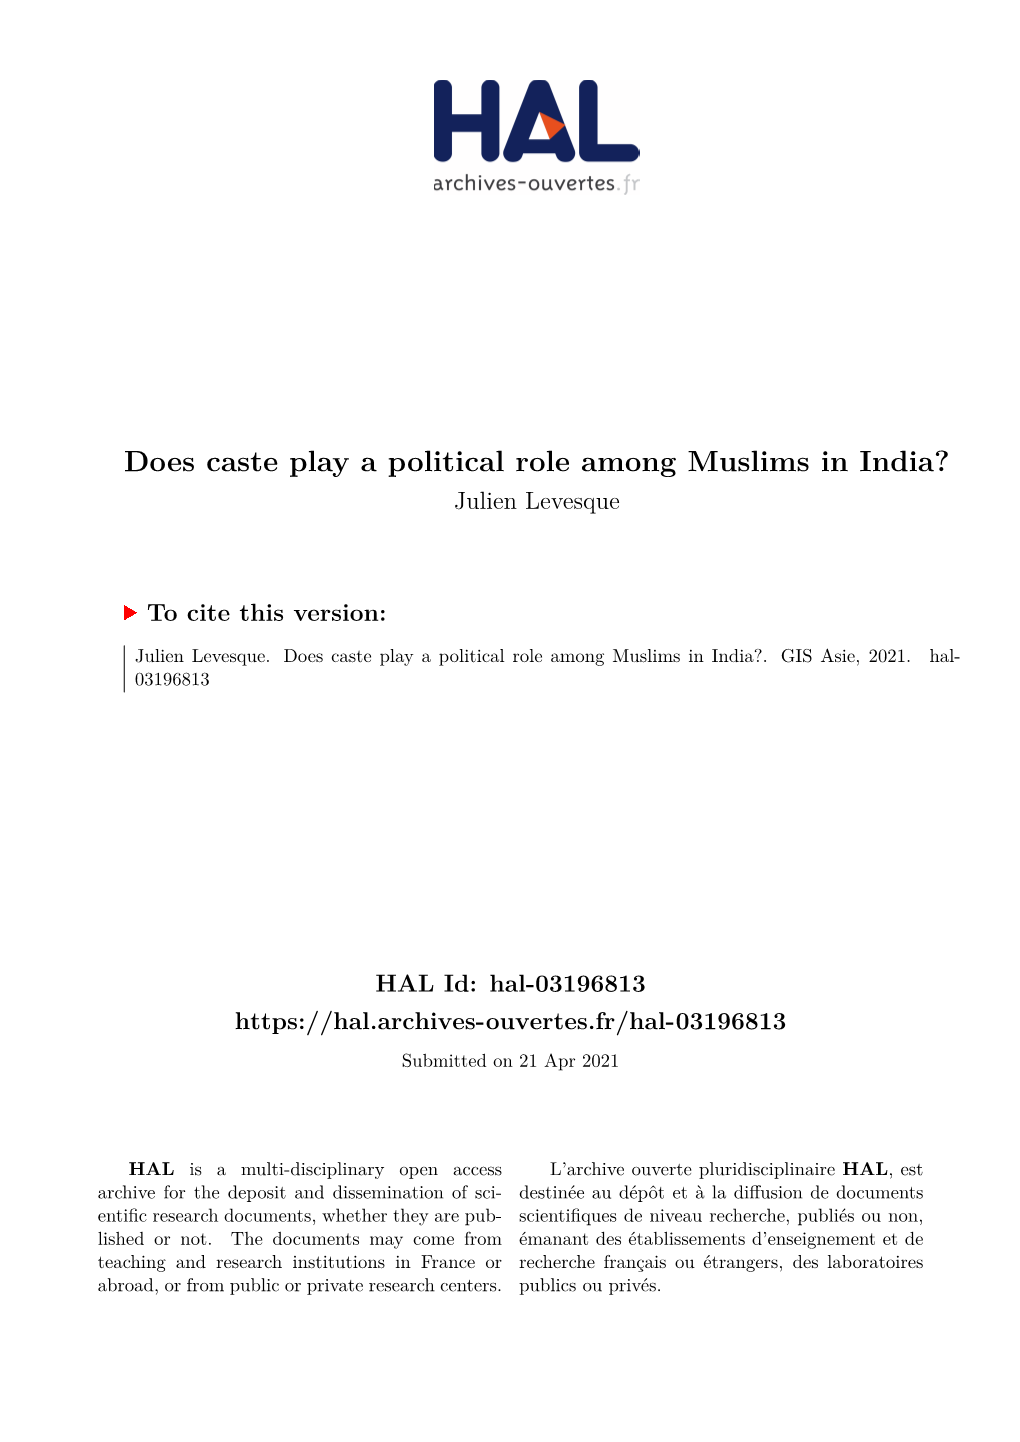 Does Caste Play a Political Role Among Muslims in India? Julien Levesque